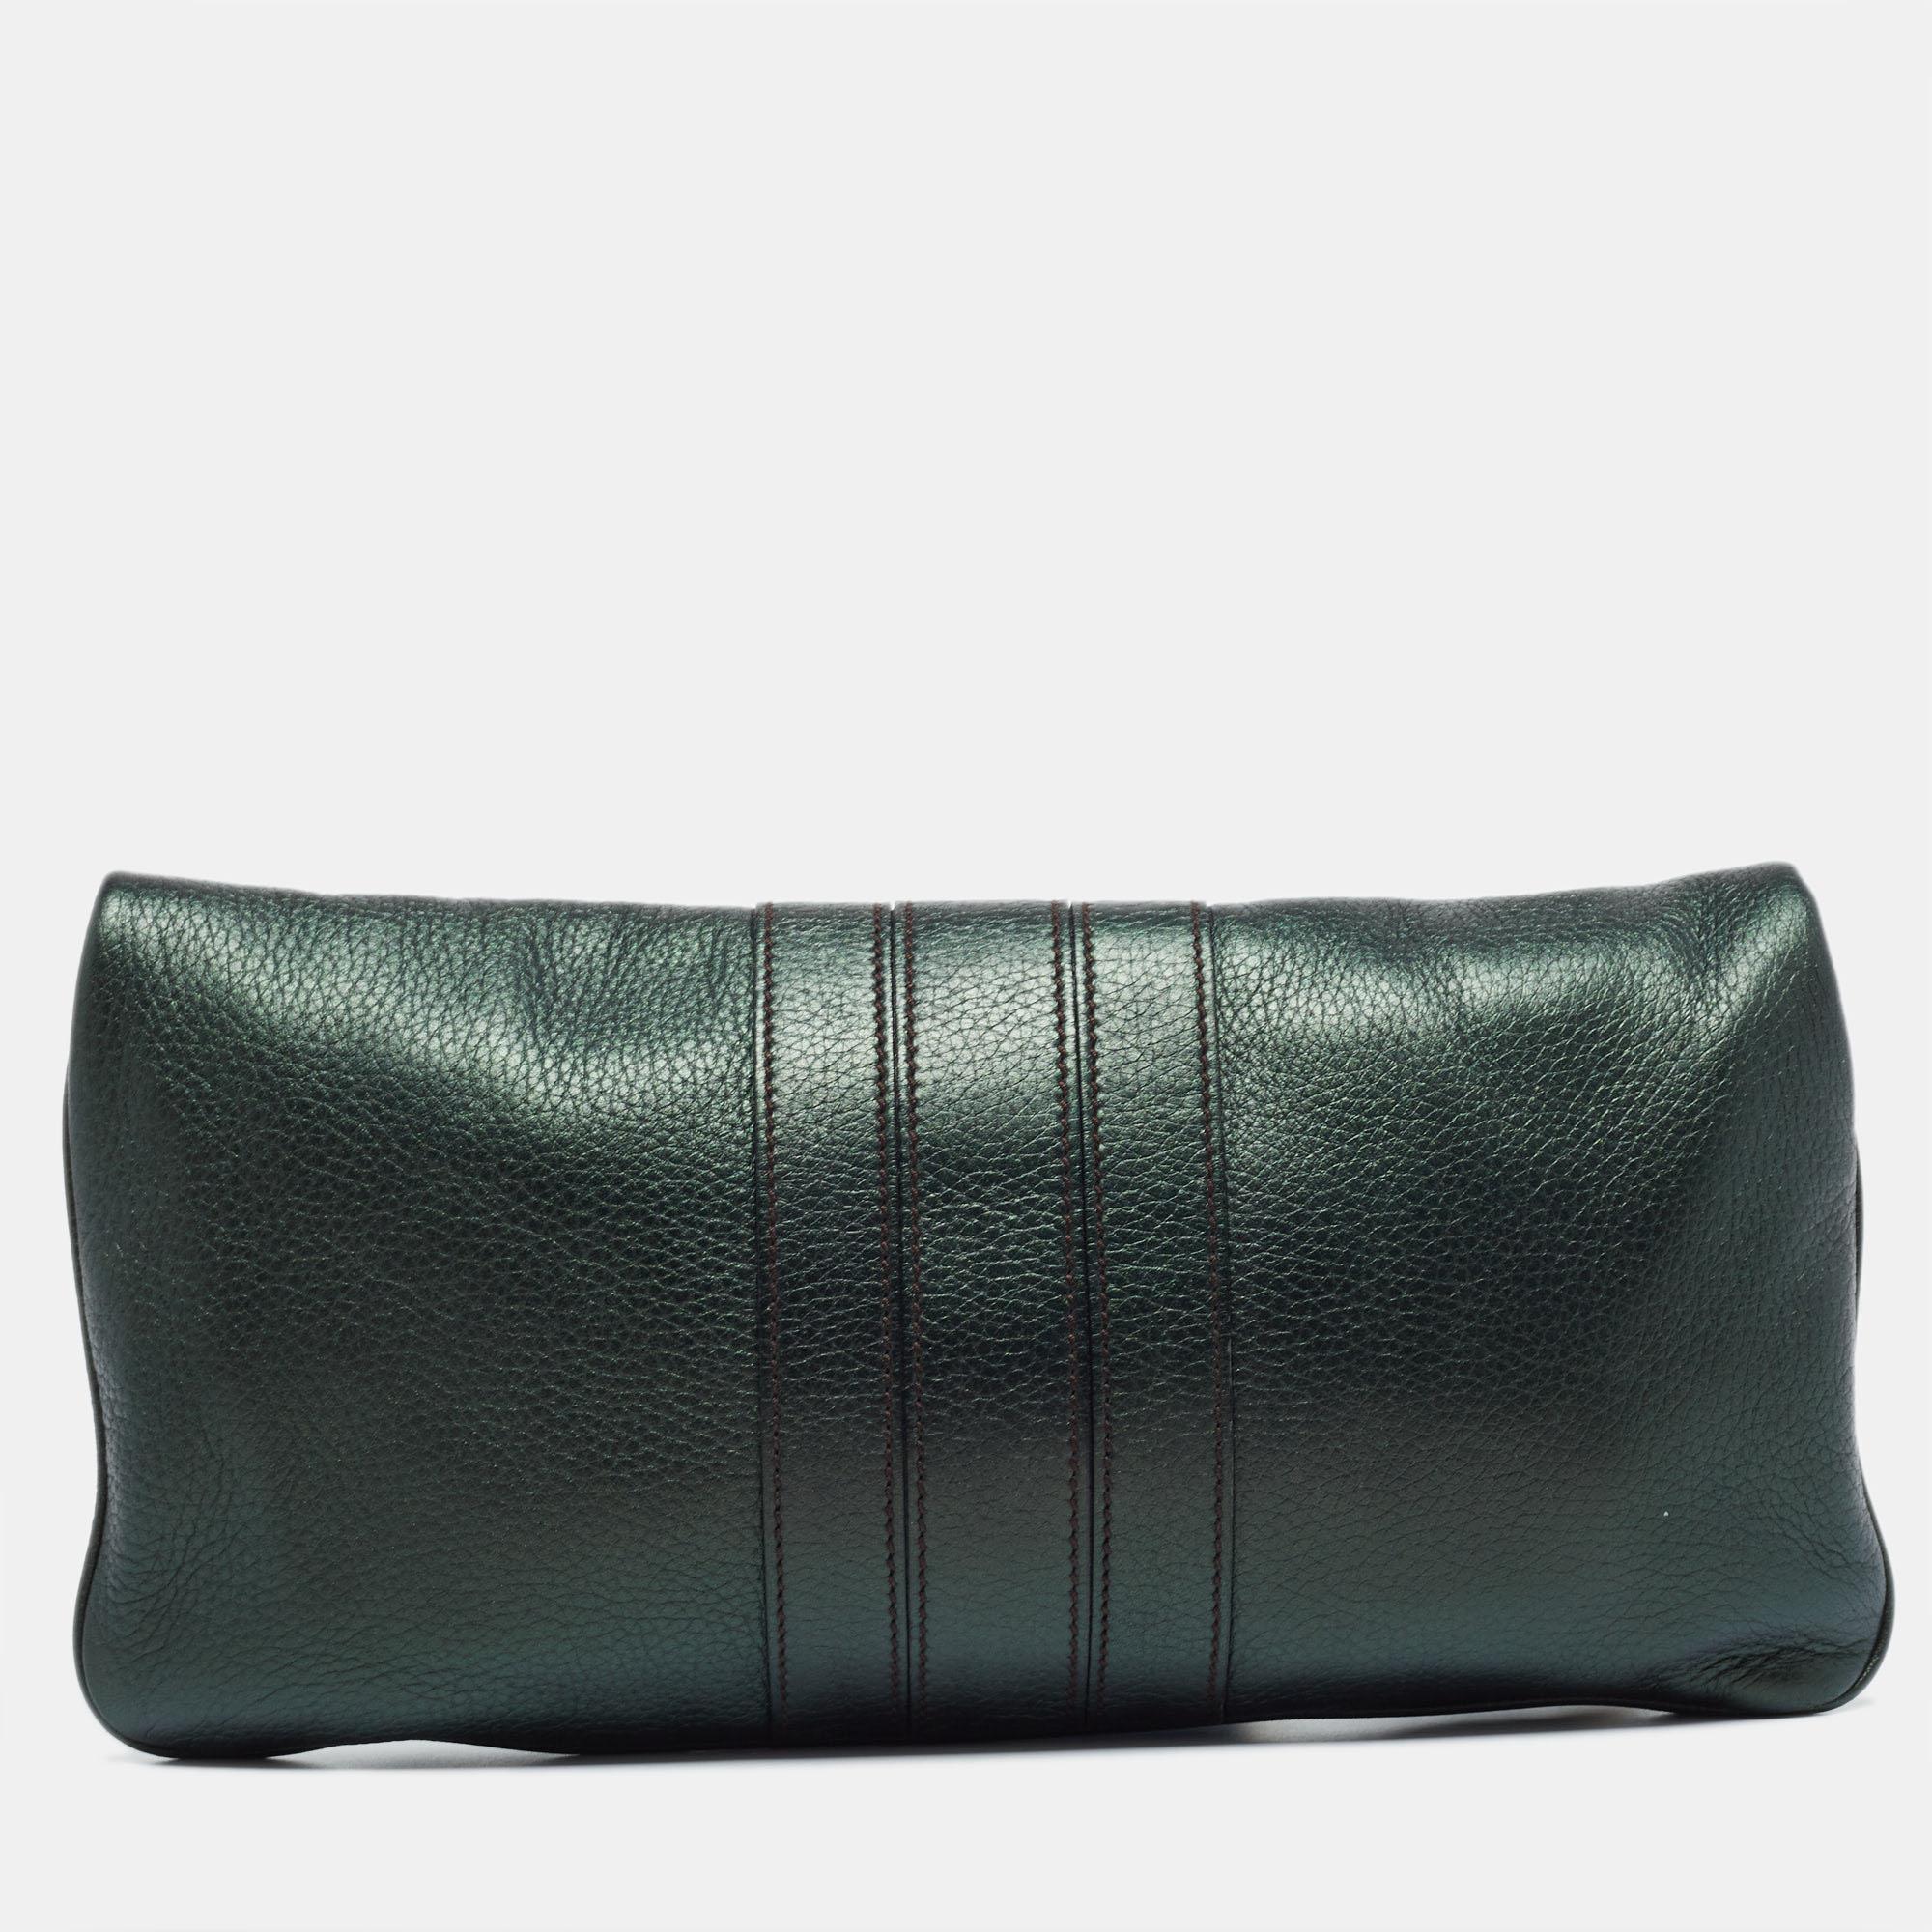 The eye-catching and enduring details of this Gucci clutch make it a wise investment. Created from leather, the design gets a classic update with a bamboo turn-lock feature and the bamboo-tassel slider of the zipper closure. While its fabric-lined